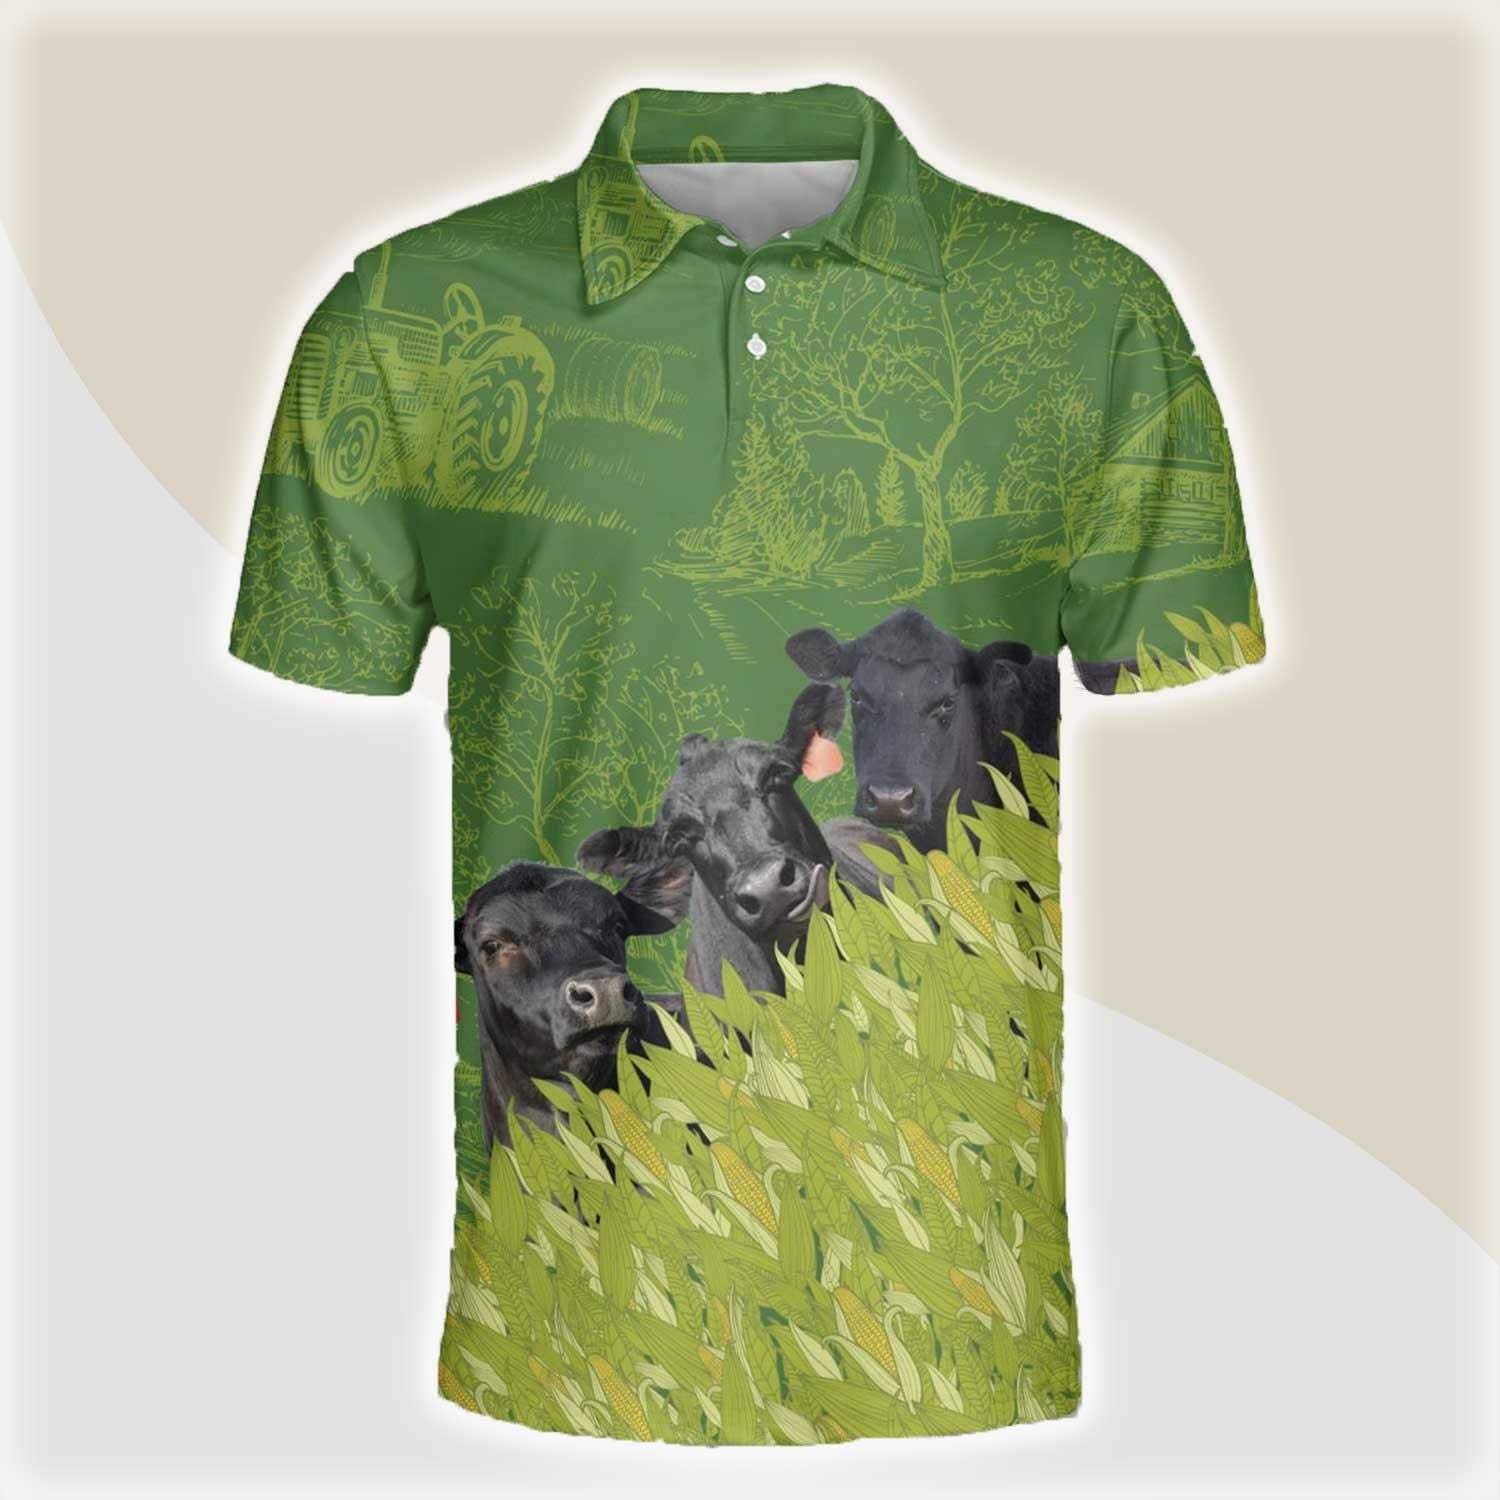 Black Angus Men Polo Shirts - Black Angus Corn Field Pattern Button Shirts For Men - Perfect Gift For Black Angus Lovers, Cattle Lovers